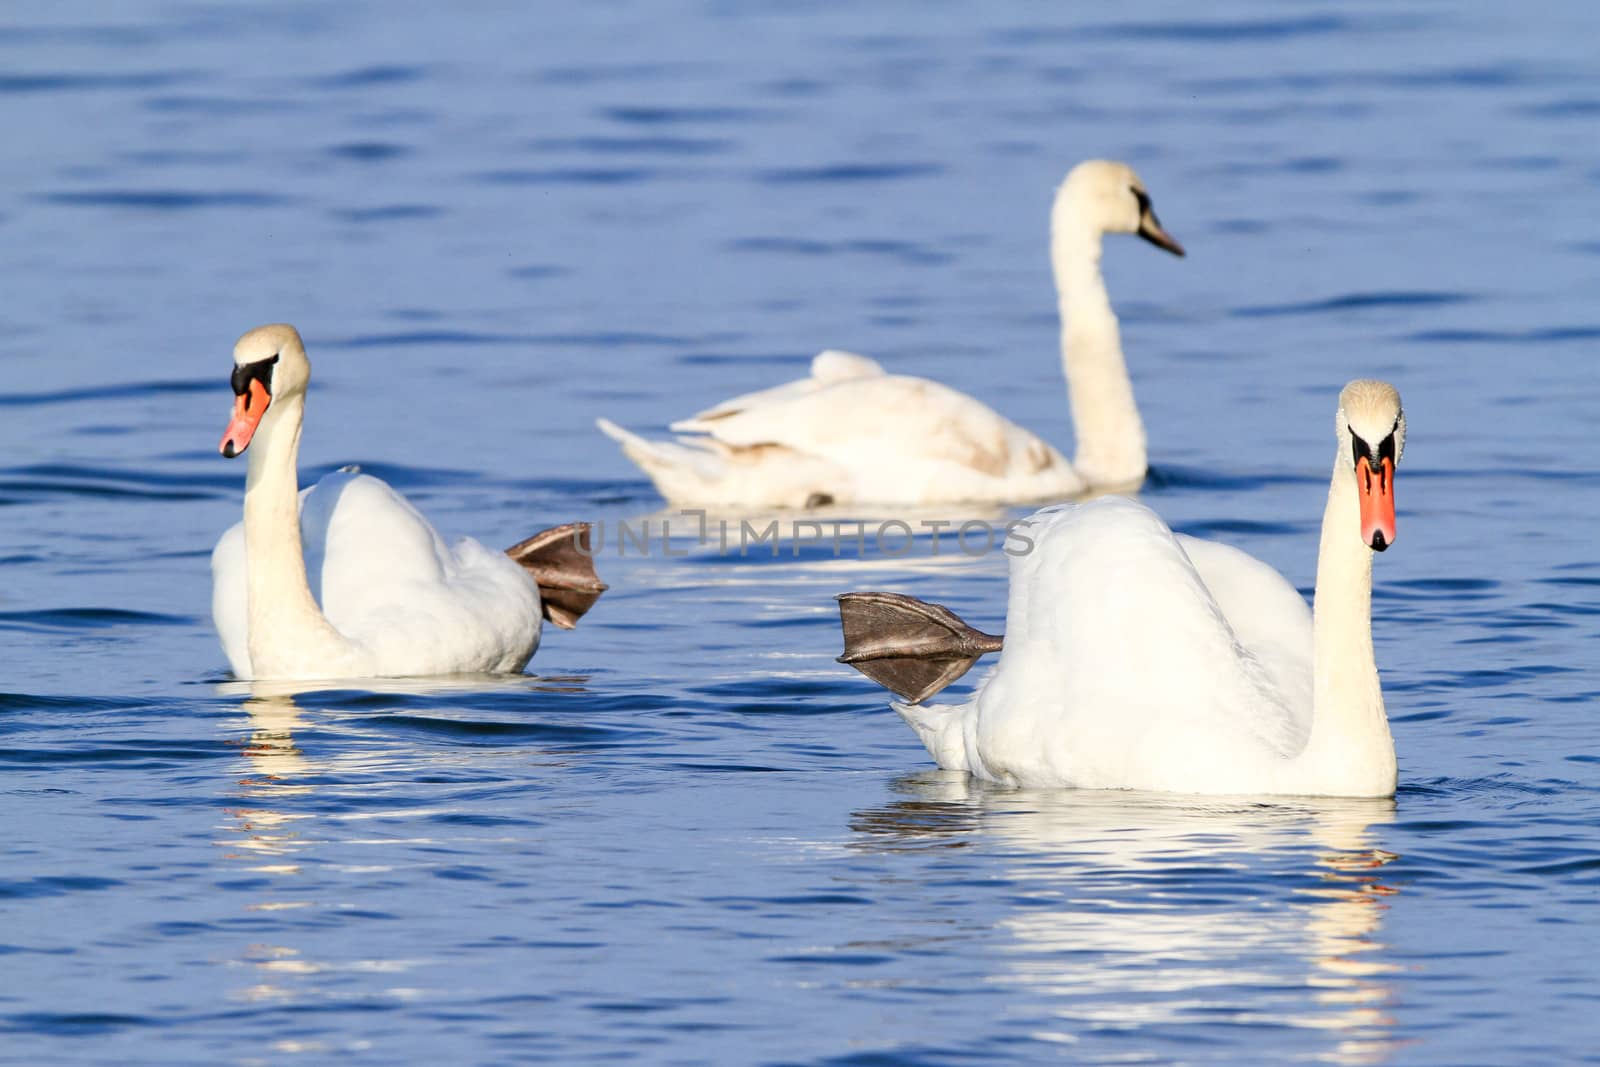 Thease swans look like they are dancing.